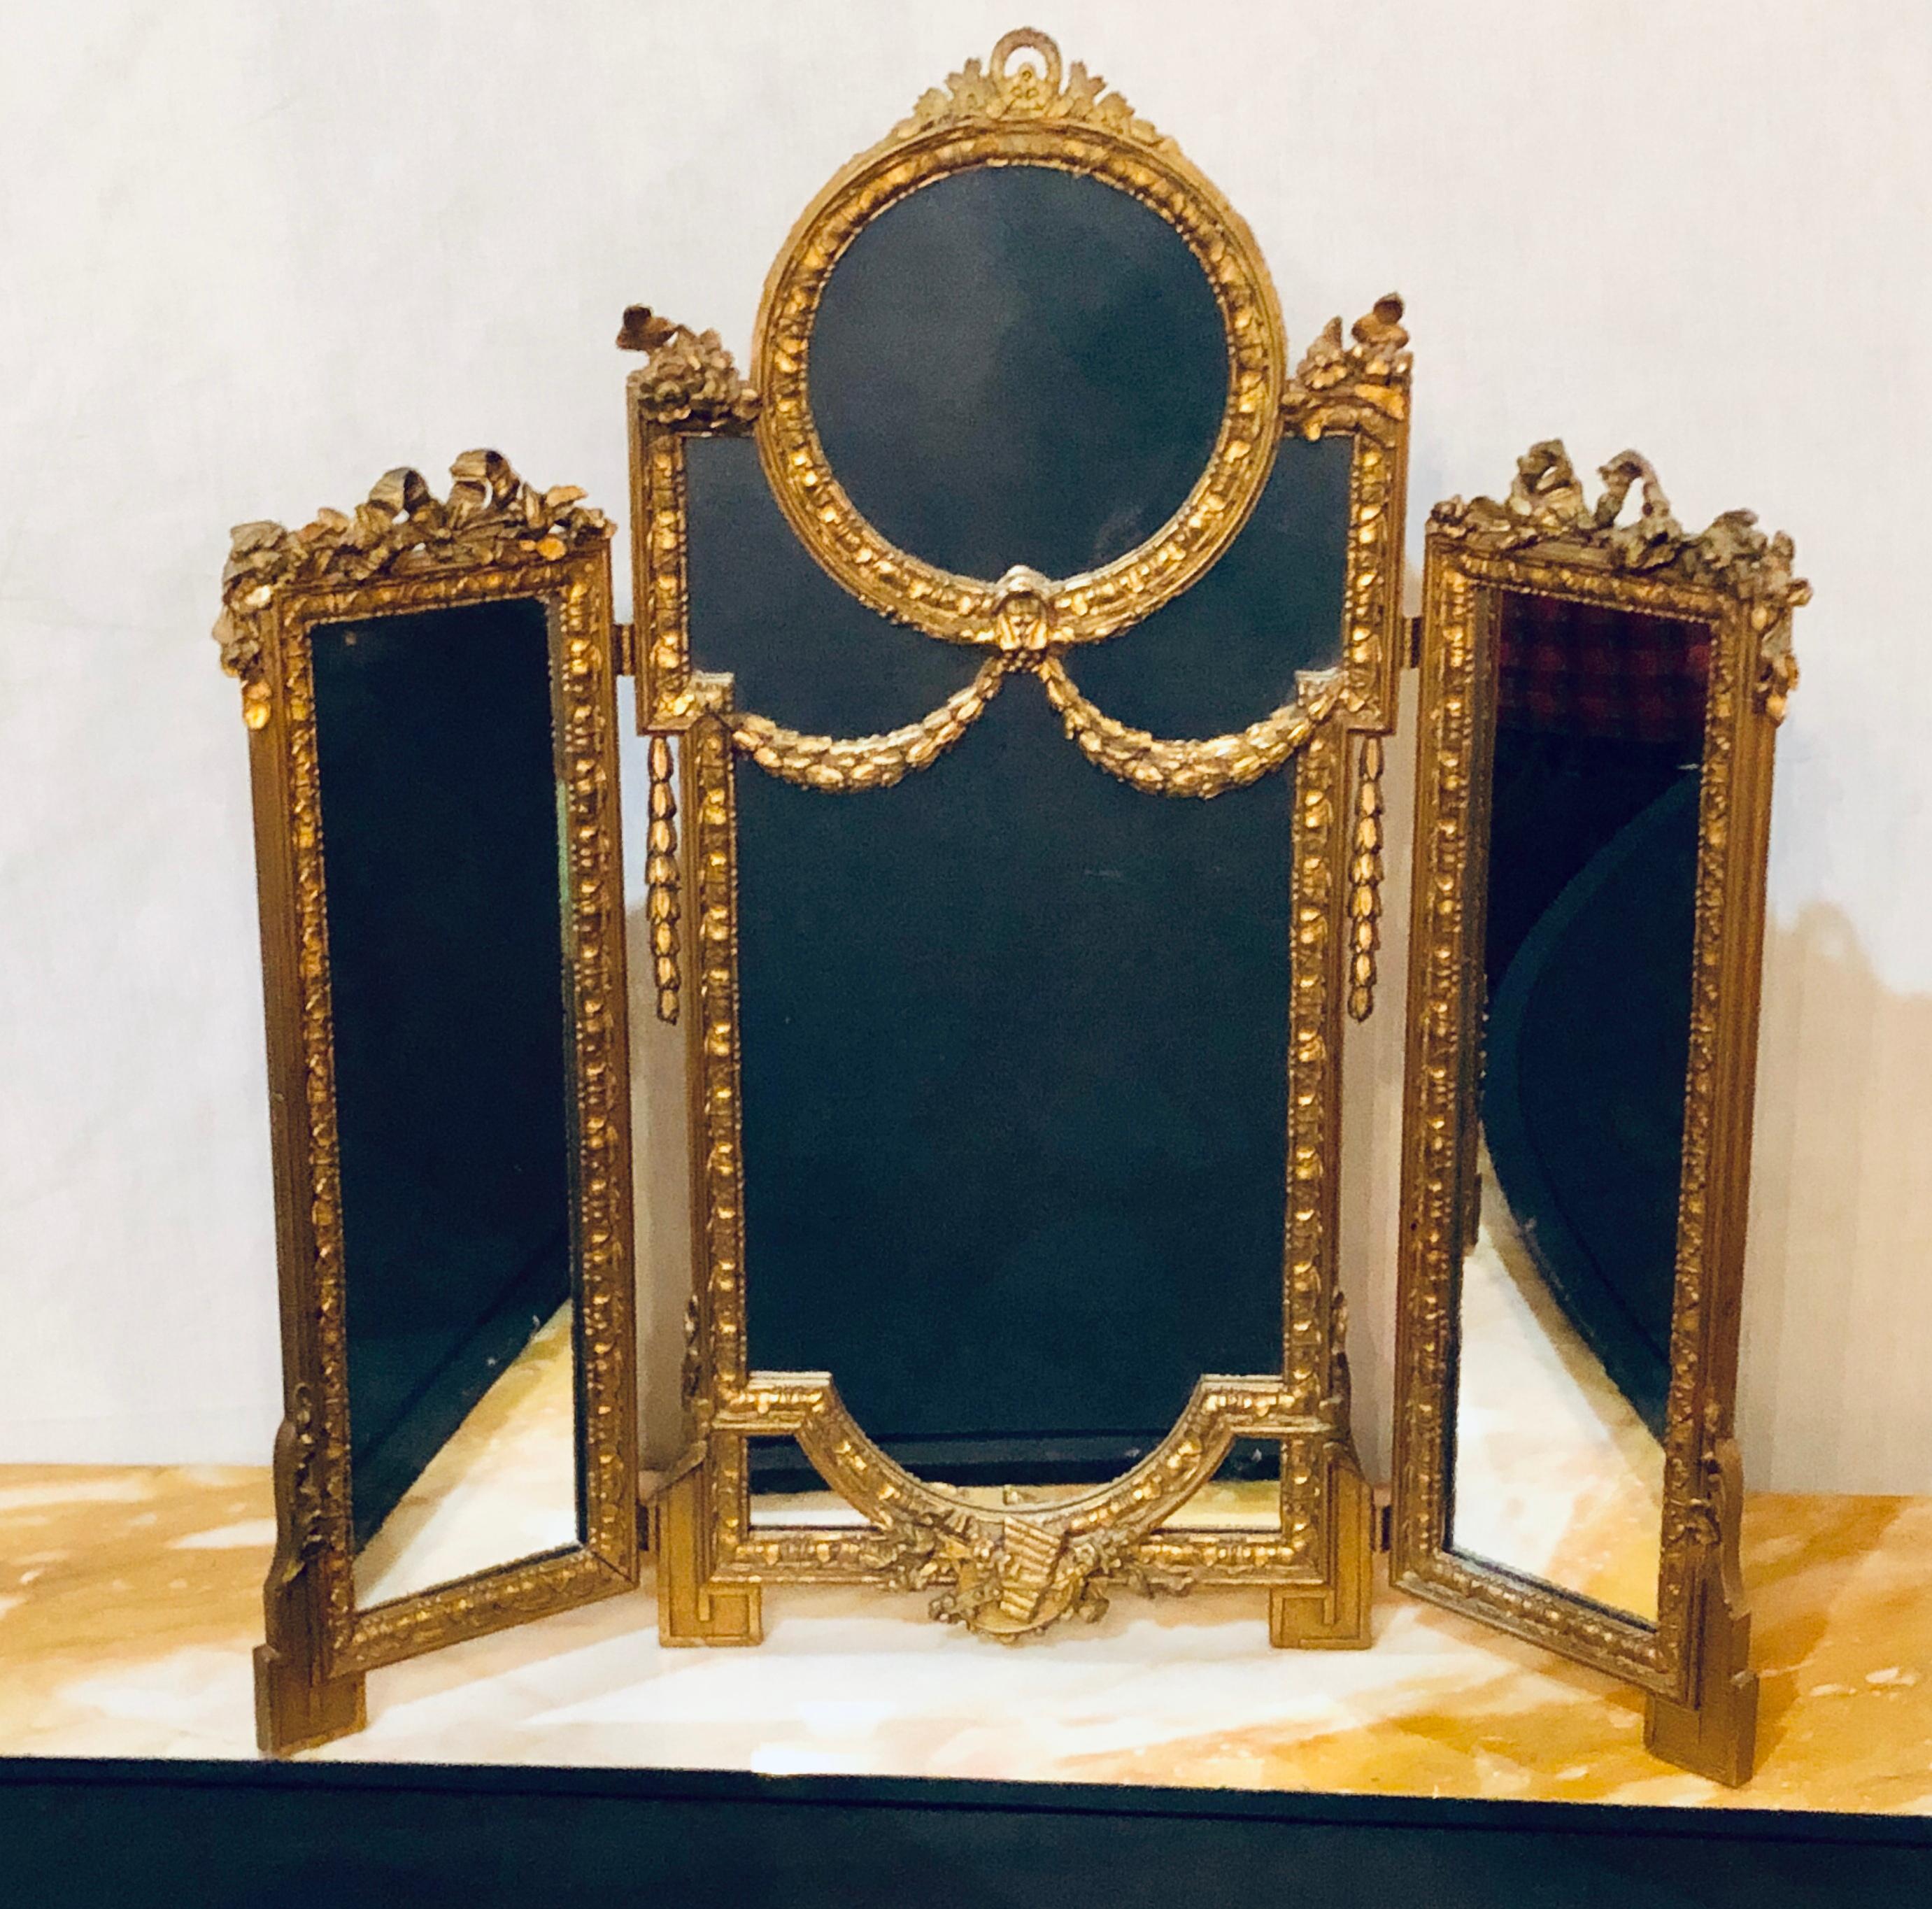 Hollywood Regency 1940s Louis XVI Style Gilt wood Tri-fold Vanity or Table Mirror. This small table or vanity mirror is simply as sweet as can be. The Louis XVI carved gilt wooden frame having the standard bow and arrow with tassel carvings one